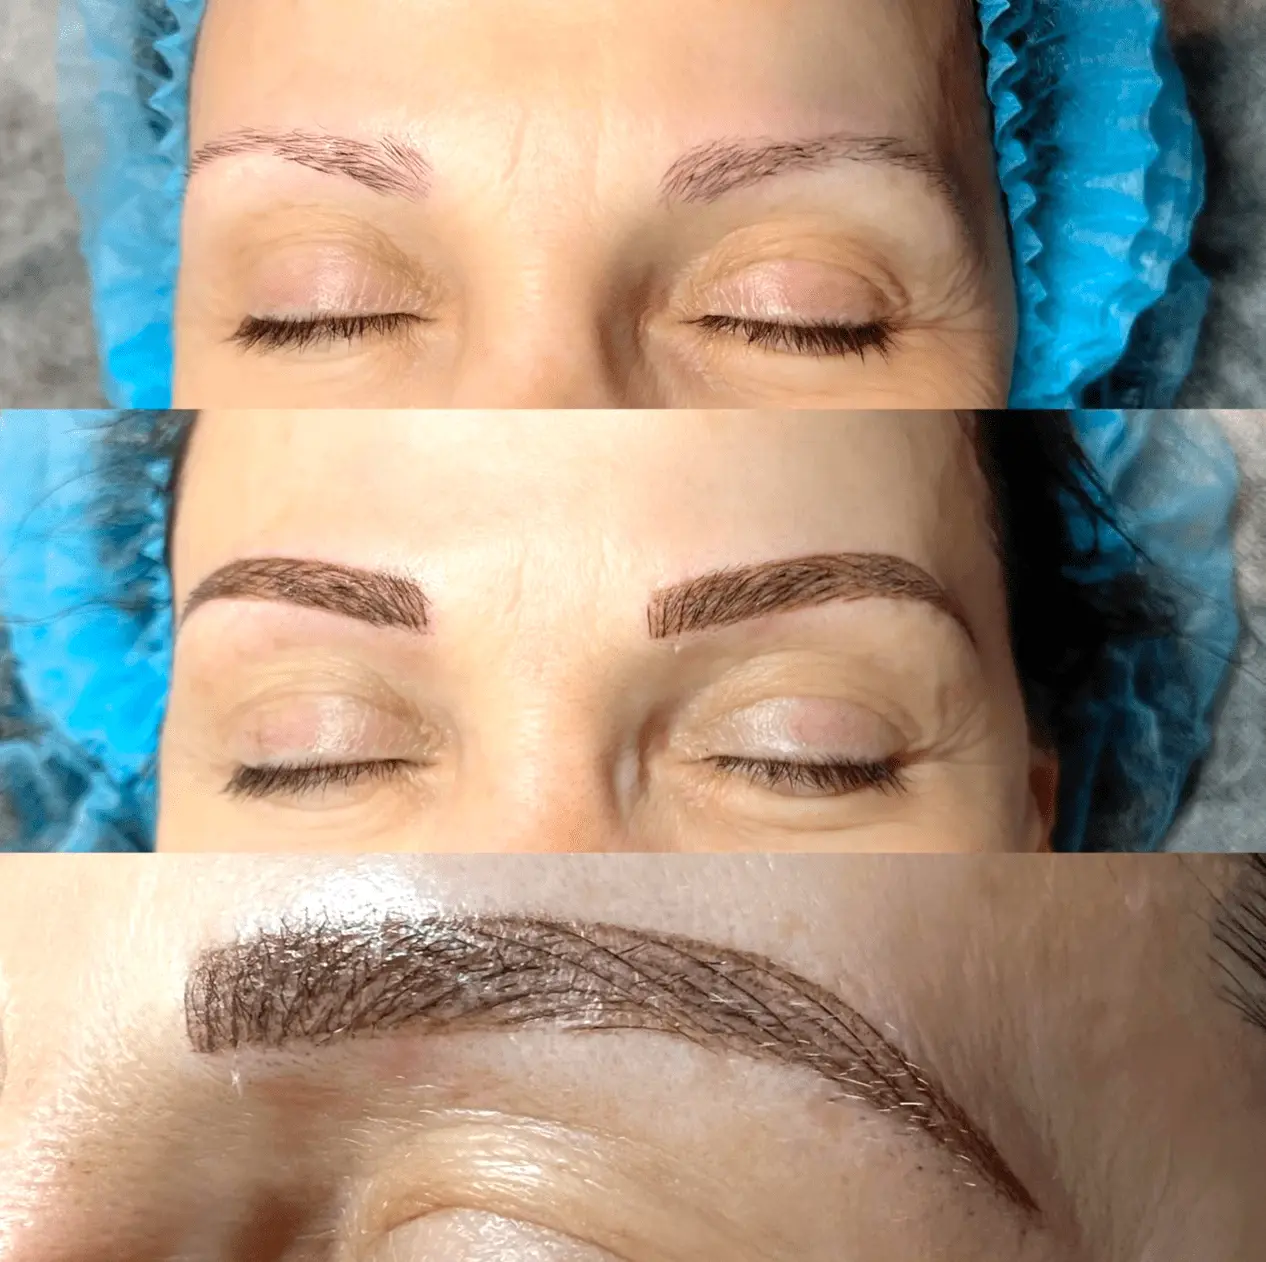 Saline Eyebrow Tattoo Removal Before And After